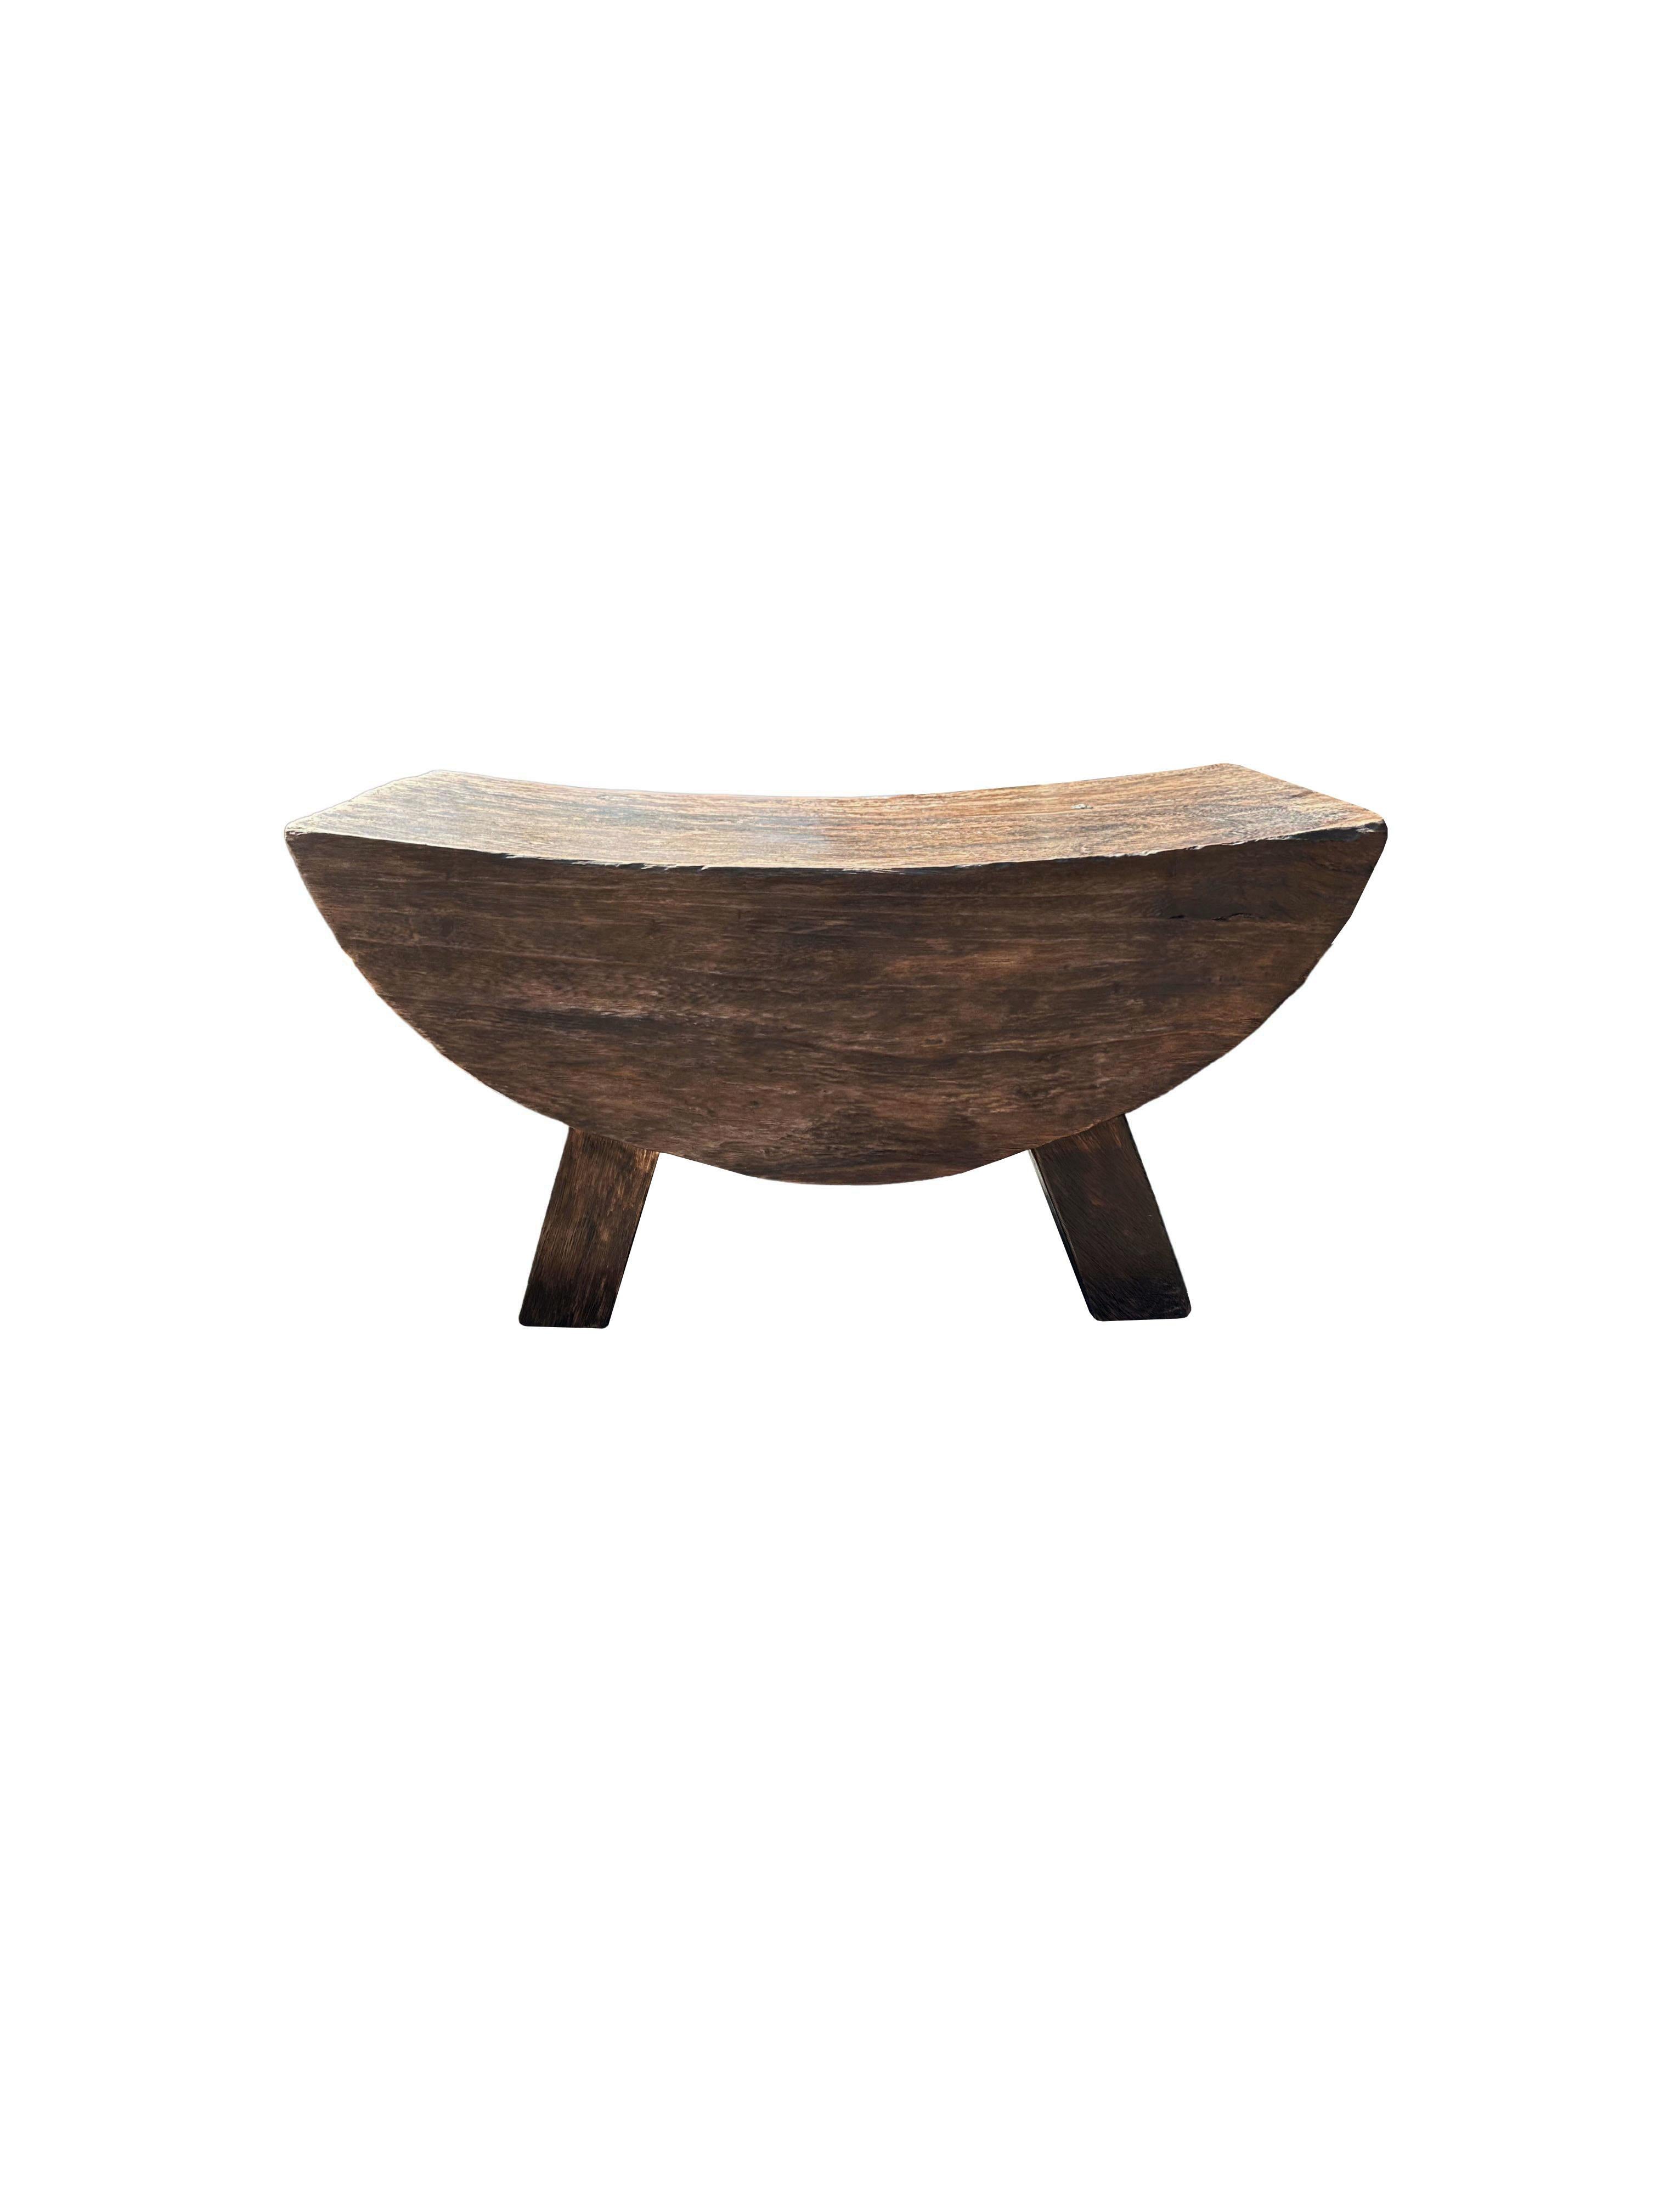 Hand-Crafted Sculptural Stool with Curved Seat Suar Wood  For Sale